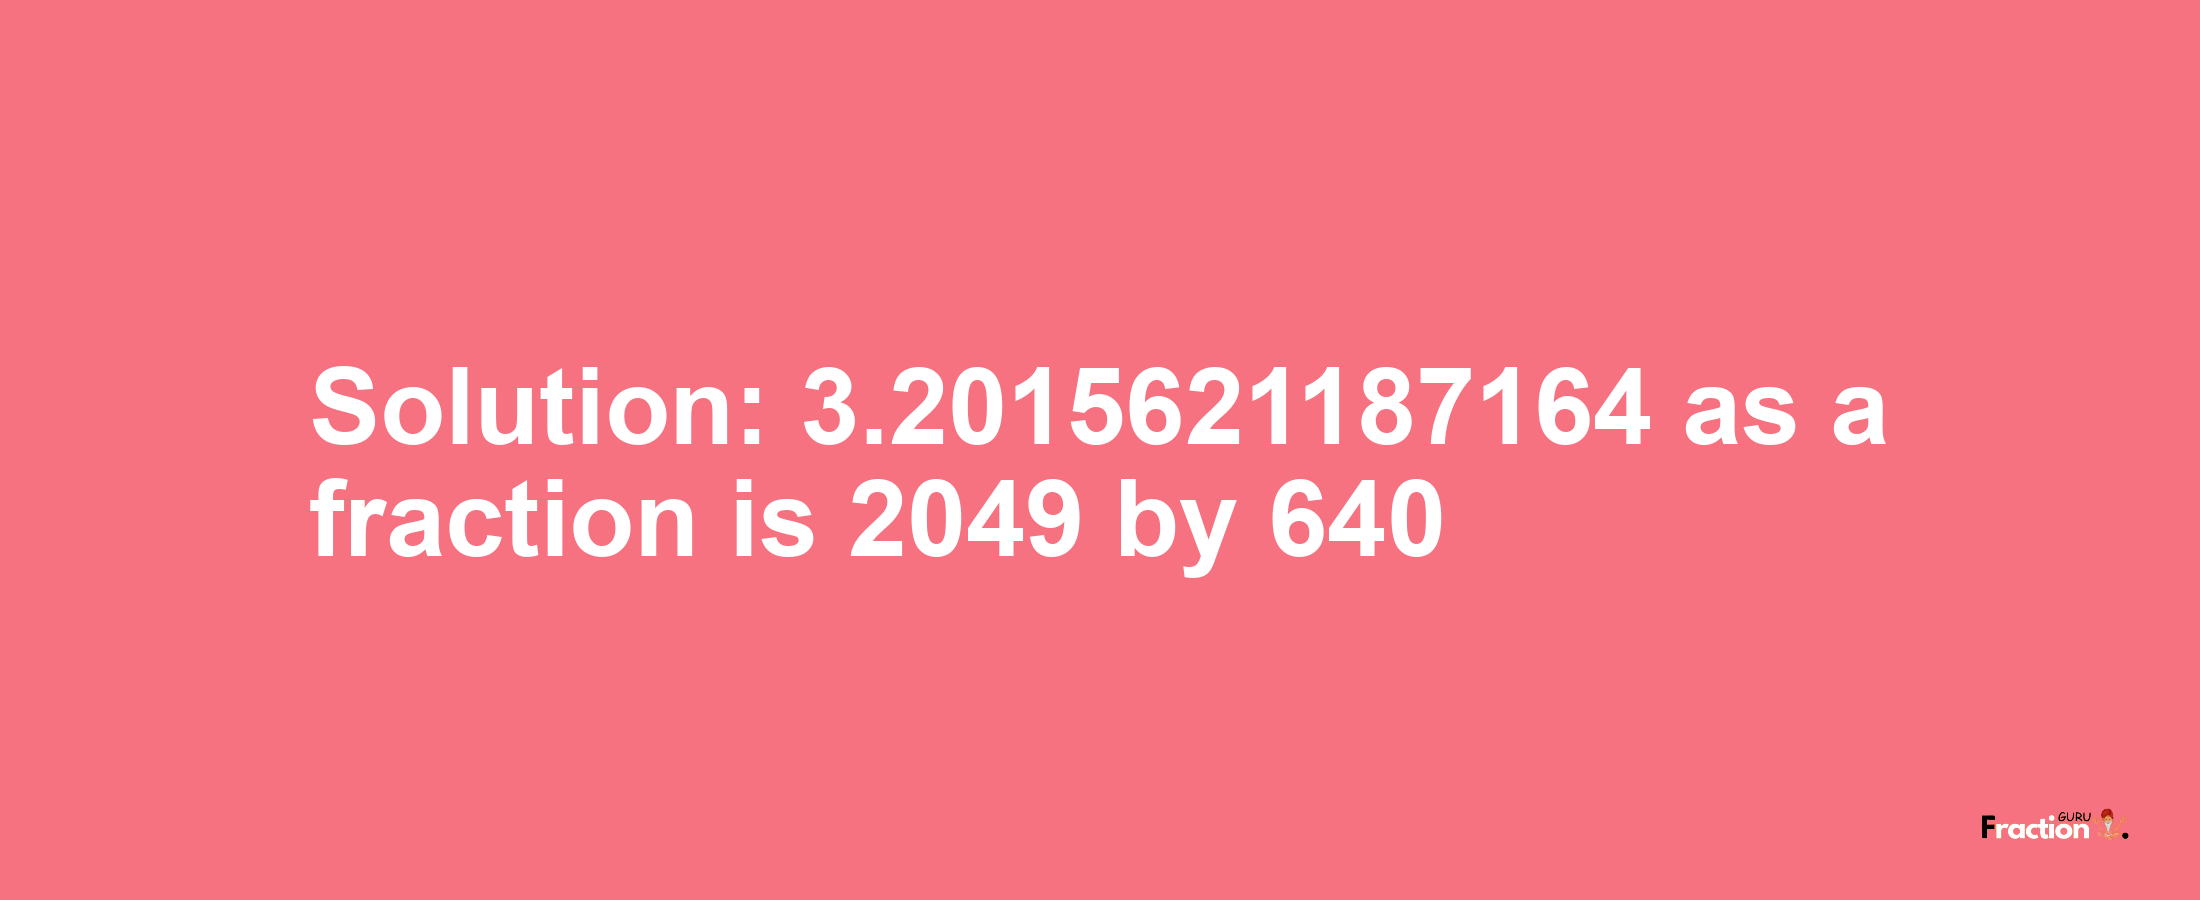 Solution:3.2015621187164 as a fraction is 2049/640